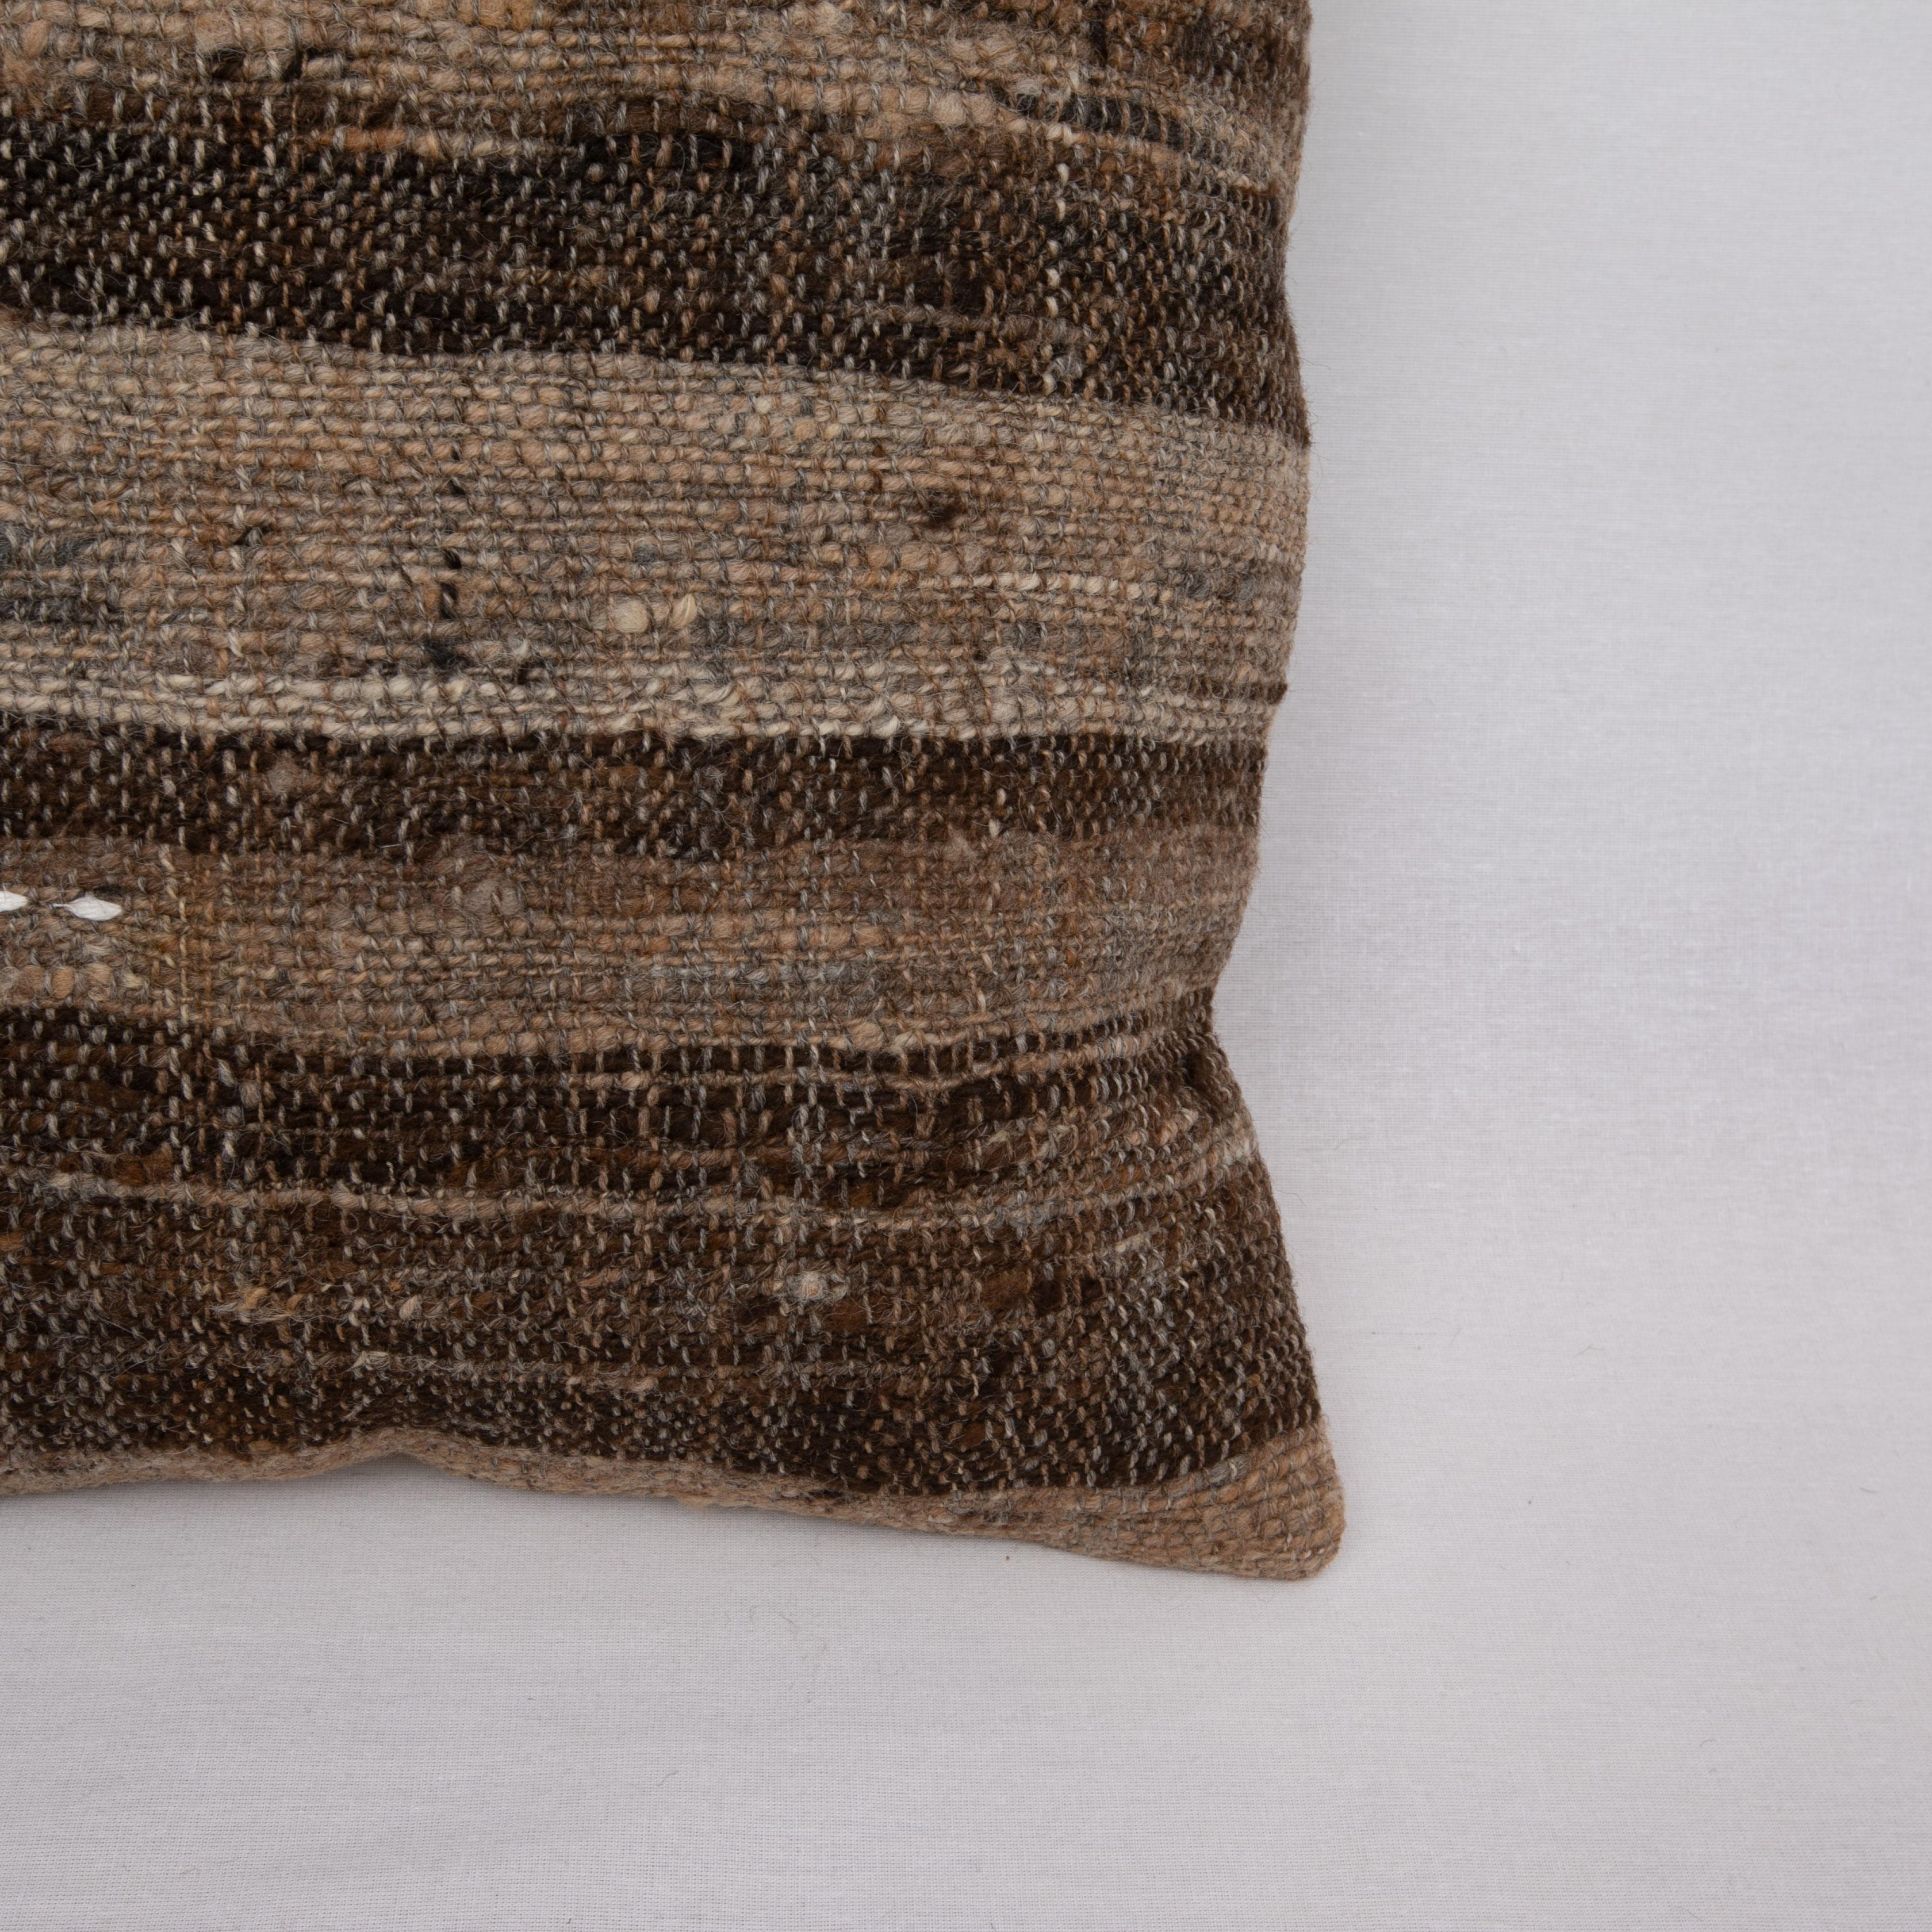 Hand-Woven Rustic Pillow Case Made from a Vintage Un-Dyed Wool Coverlet, Mid 20th C